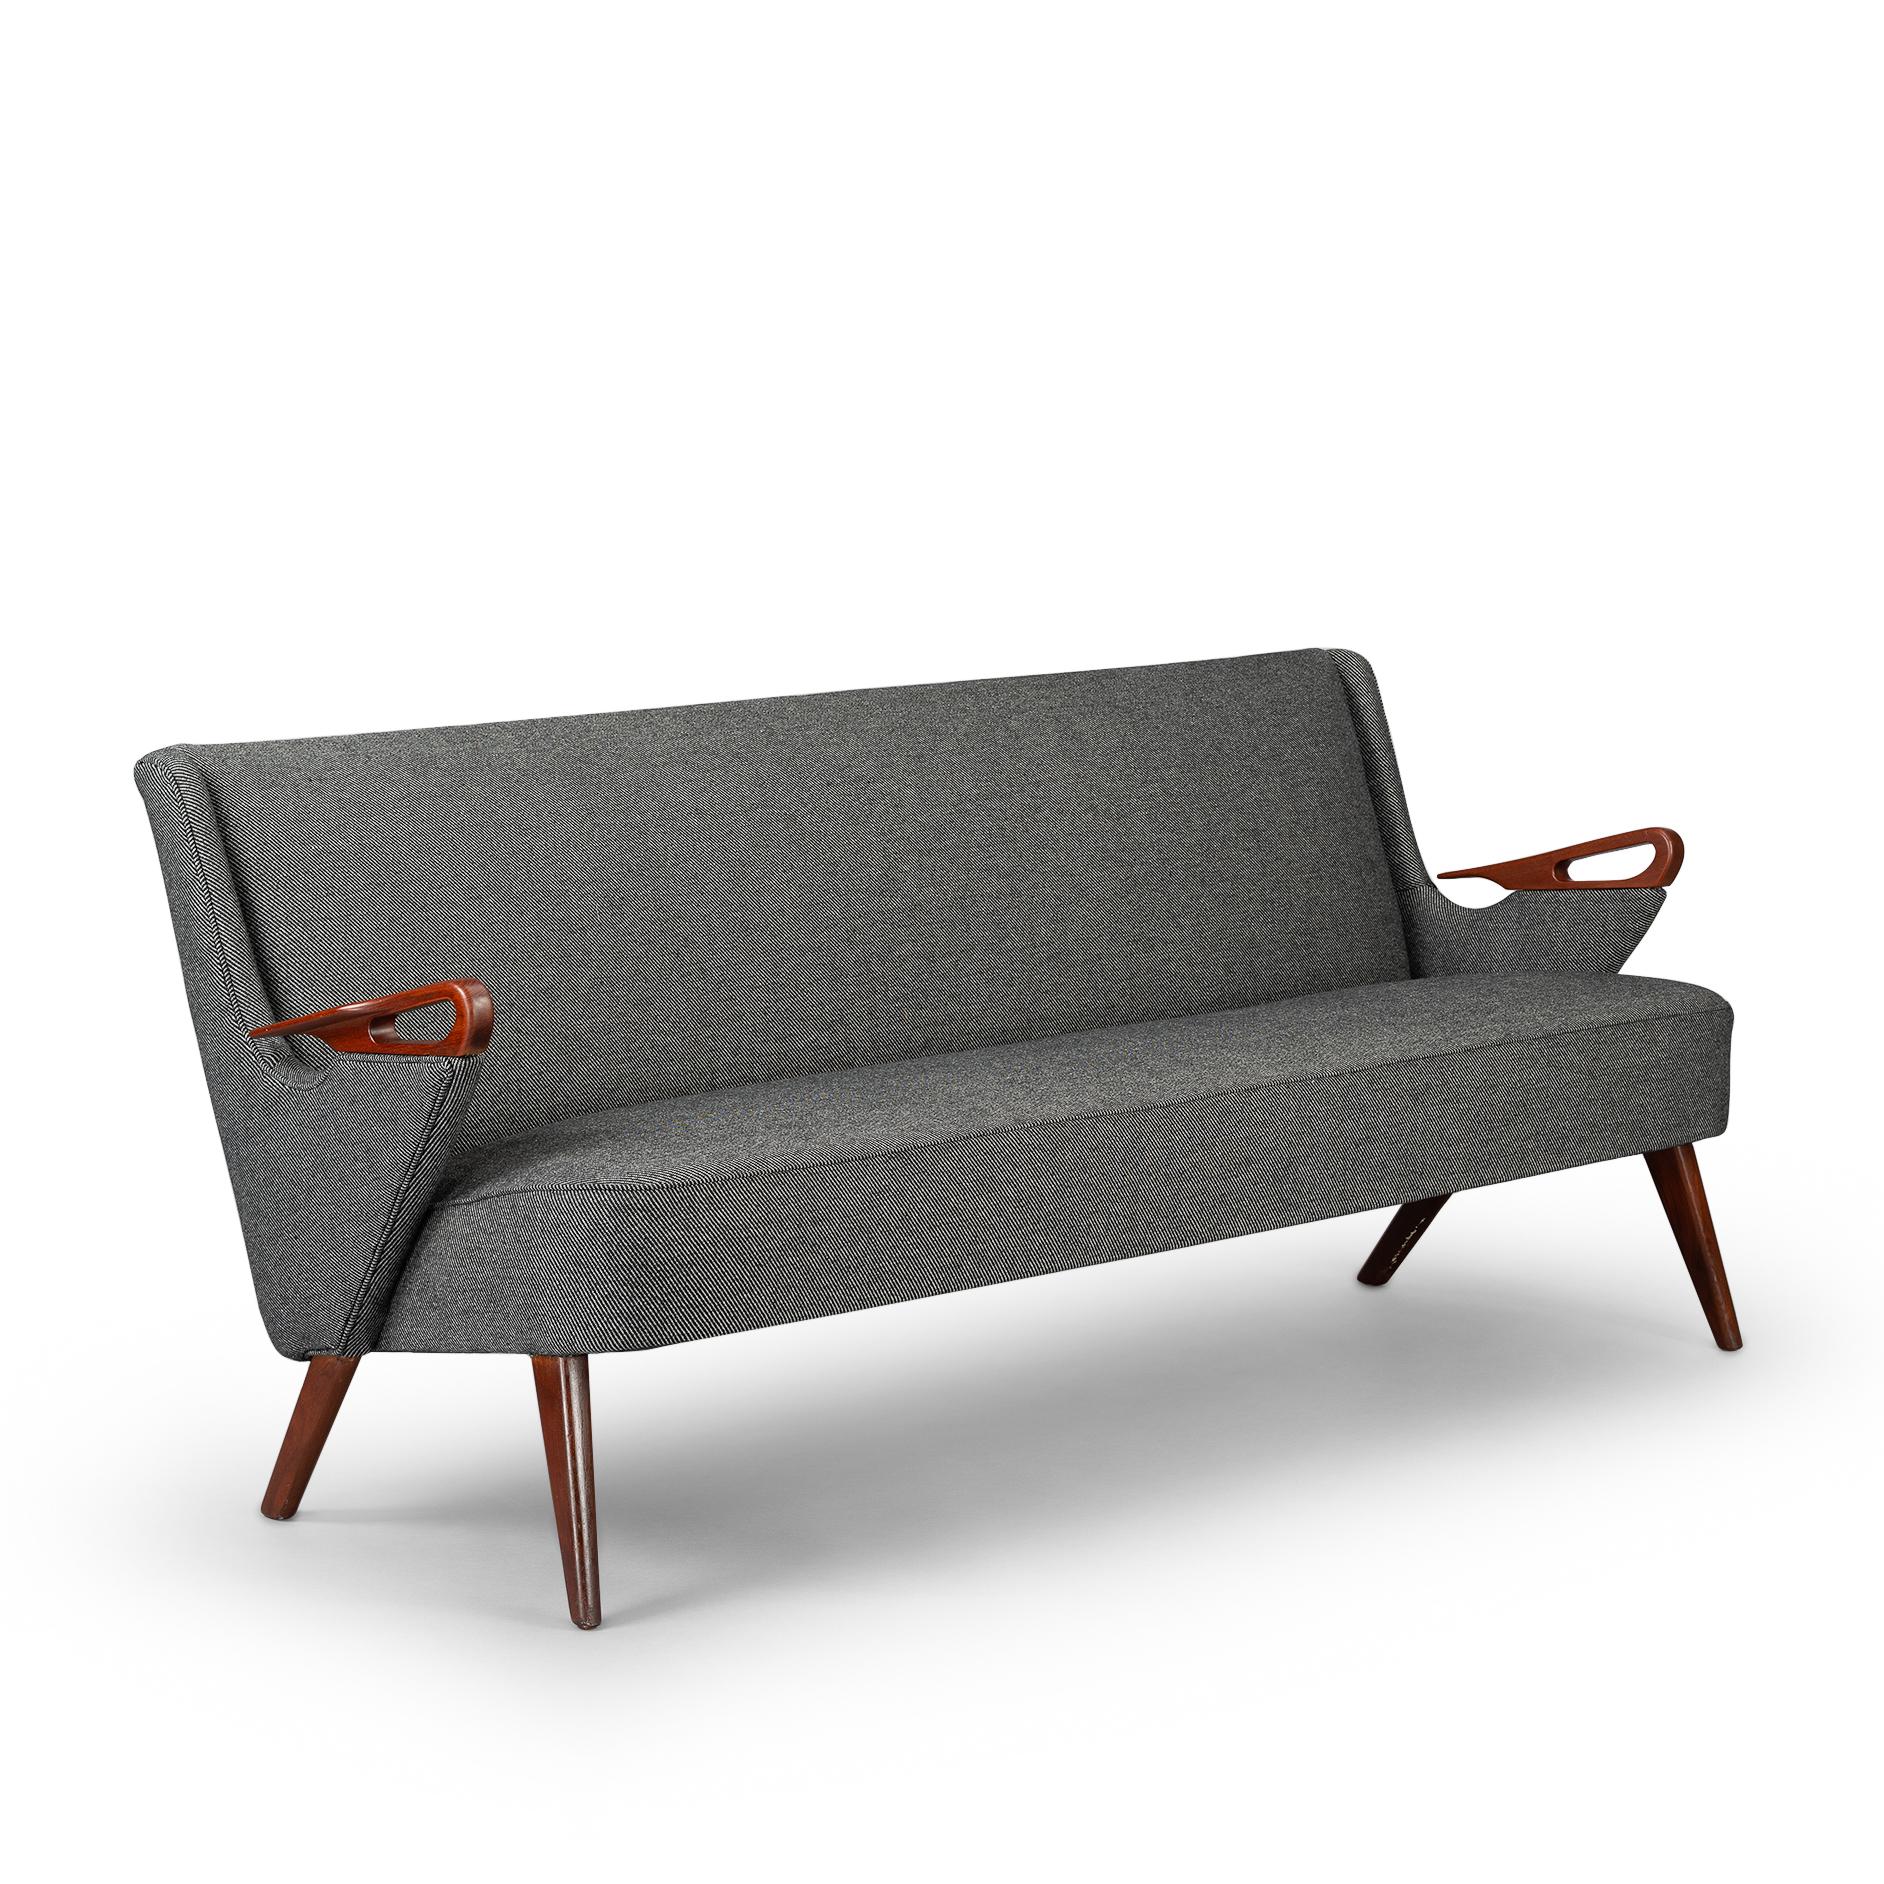 Midcentury designer 2.5 seater sofa by Chresten Findahl Brodersen. This sofa was made under design Number CFB52 in the Skaerbaek South Jutland Findahl Møbelfabrik in the mid-1950s. This is as pure as mid-century quality in sofa form gets, beautiful